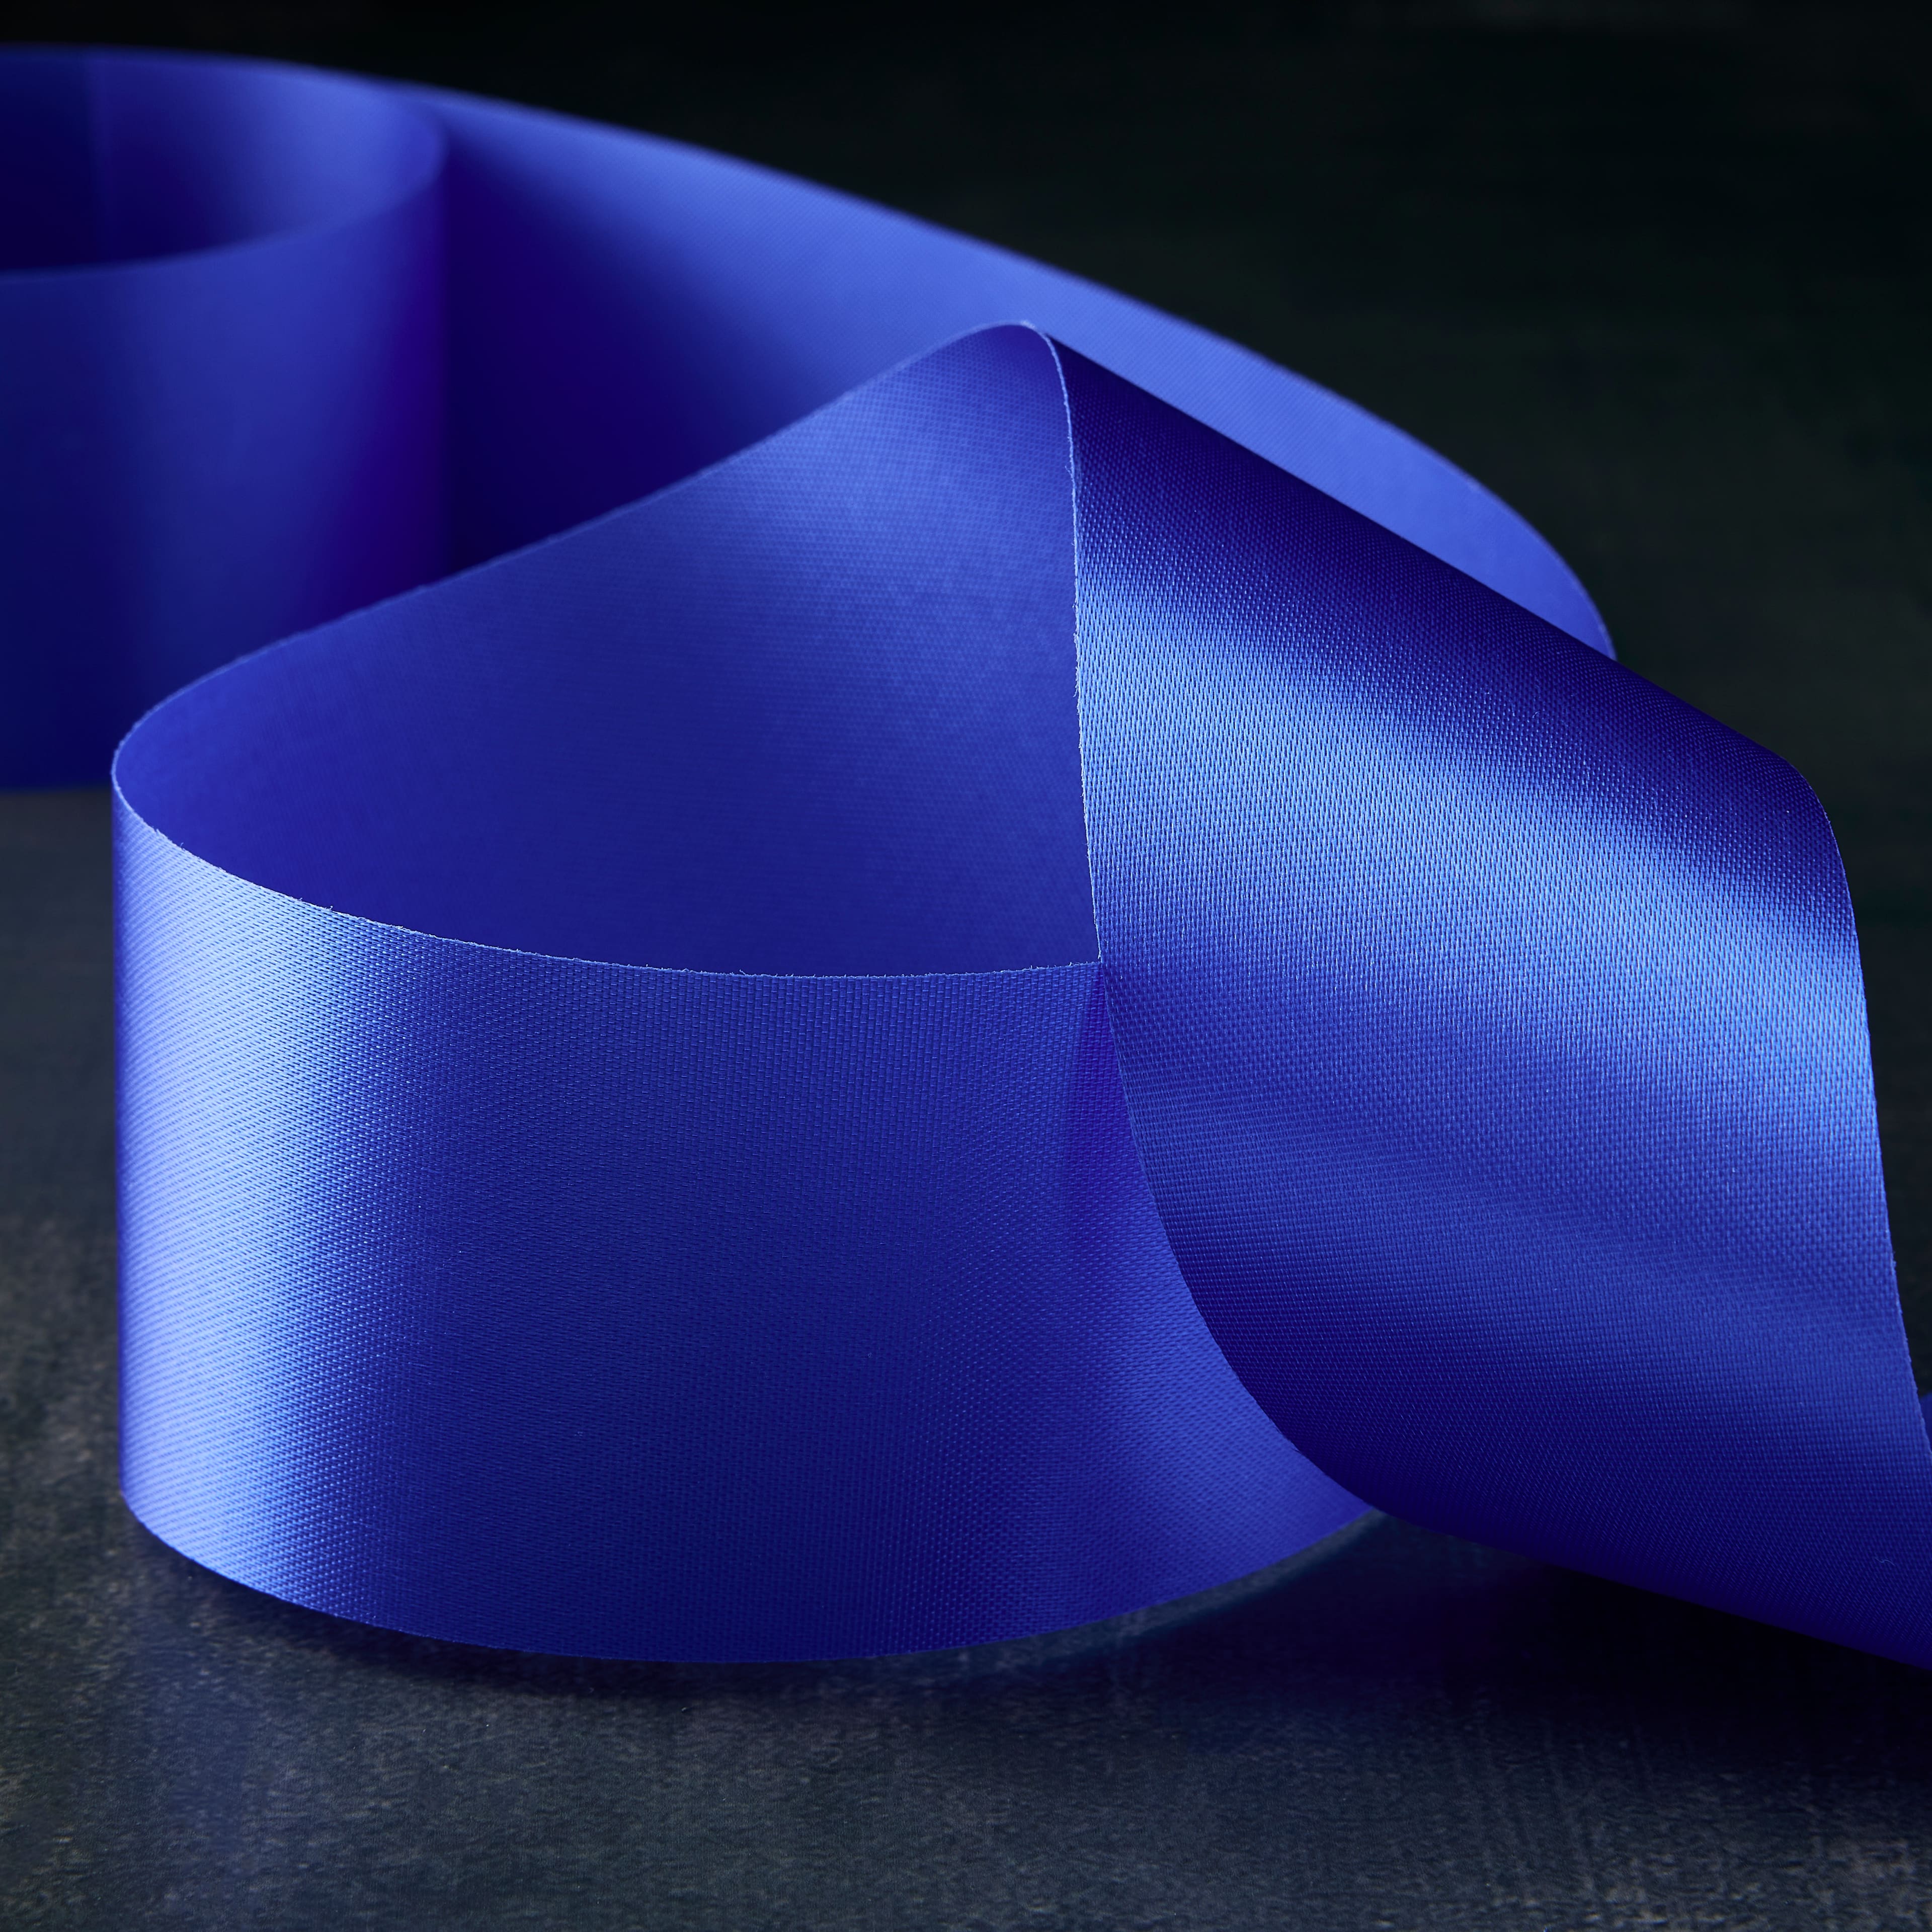 12 Pack: 1.5 x 4yd. Satin Ribbon by Celebrate It® Classic